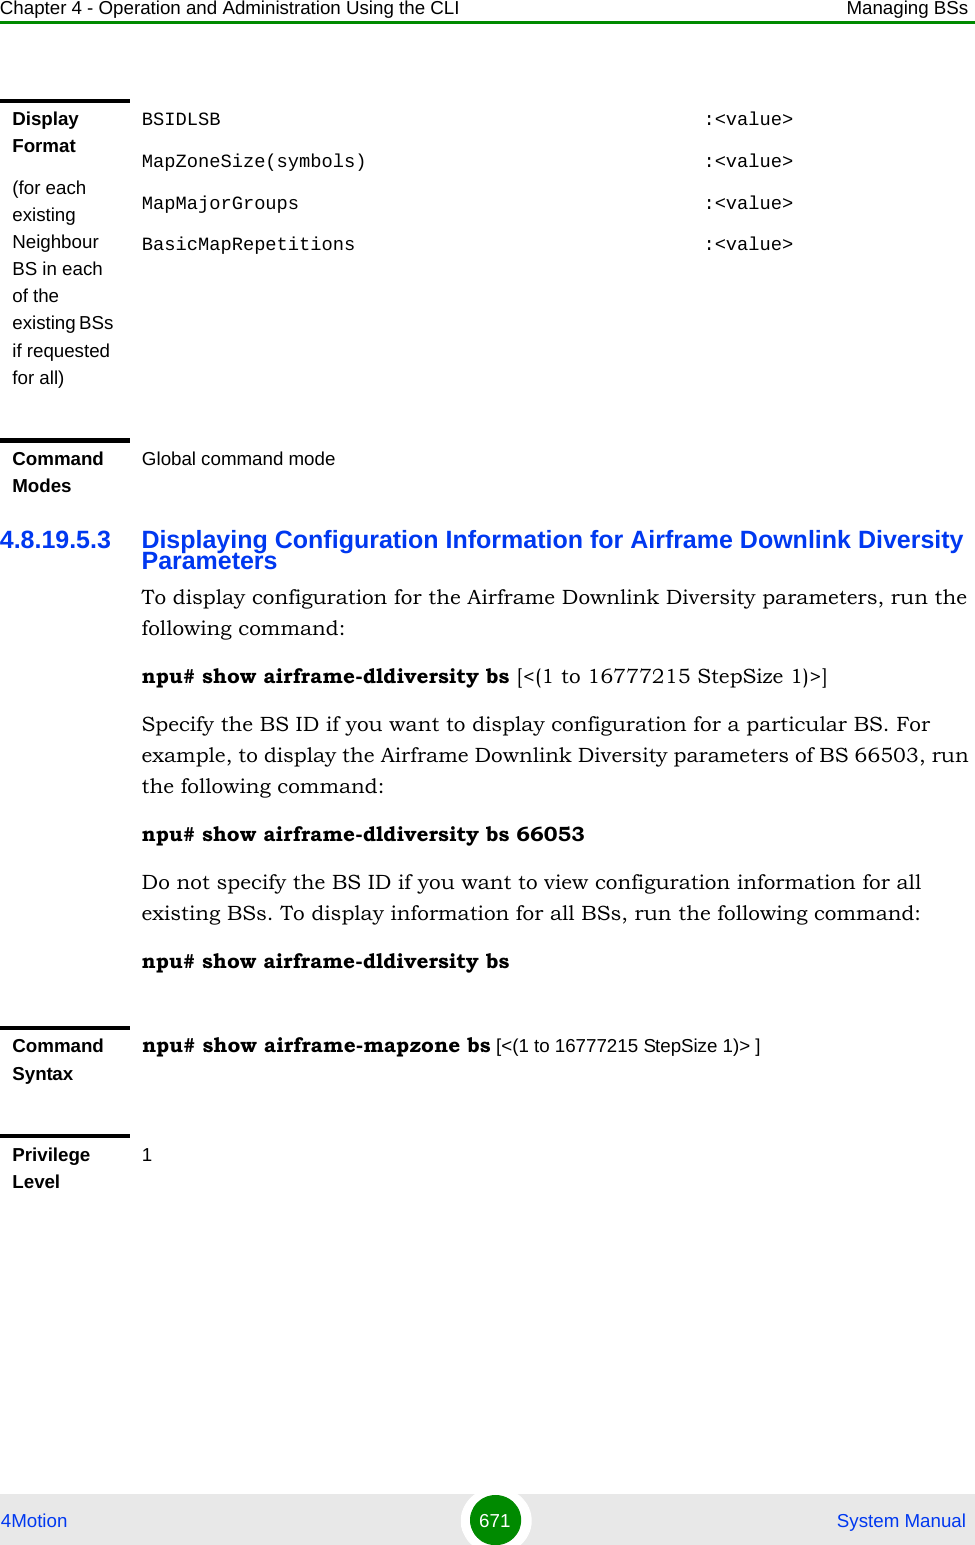 Chapter 4 - Operation and Administration Using the CLI Managing BSs4Motion 671  System Manual4.8.19.5.3 Displaying Configuration Information for Airframe Downlink Diversity ParametersTo display configuration for the Airframe Downlink Diversity parameters, run the following command:npu# show airframe-dldiversity bs [&lt;(1 to 16777215 StepSize 1)&gt;]Specify the BS ID if you want to display configuration for a particular BS. For example, to display the Airframe Downlink Diversity parameters of BS 66503, run the following command:npu# show airframe-dldiversity bs 66053 Do not specify the BS ID if you want to view configuration information for all existing BSs. To display information for all BSs, run the following command:npu# show airframe-dldiversity bsDisplay Format(for each existing Neighbour BS in each of the existing BSs if requested for all)BSIDLSB                                           :&lt;value&gt;MapZoneSize(symbols)                              :&lt;value&gt;MapMajorGroups                                    :&lt;value&gt;BasicMapRepetitions                               :&lt;value&gt;Command ModesGlobal command modeCommand Syntaxnpu# show airframe-mapzone bs [&lt;(1 to 16777215 StepSize 1)&gt; ]Privilege Level1